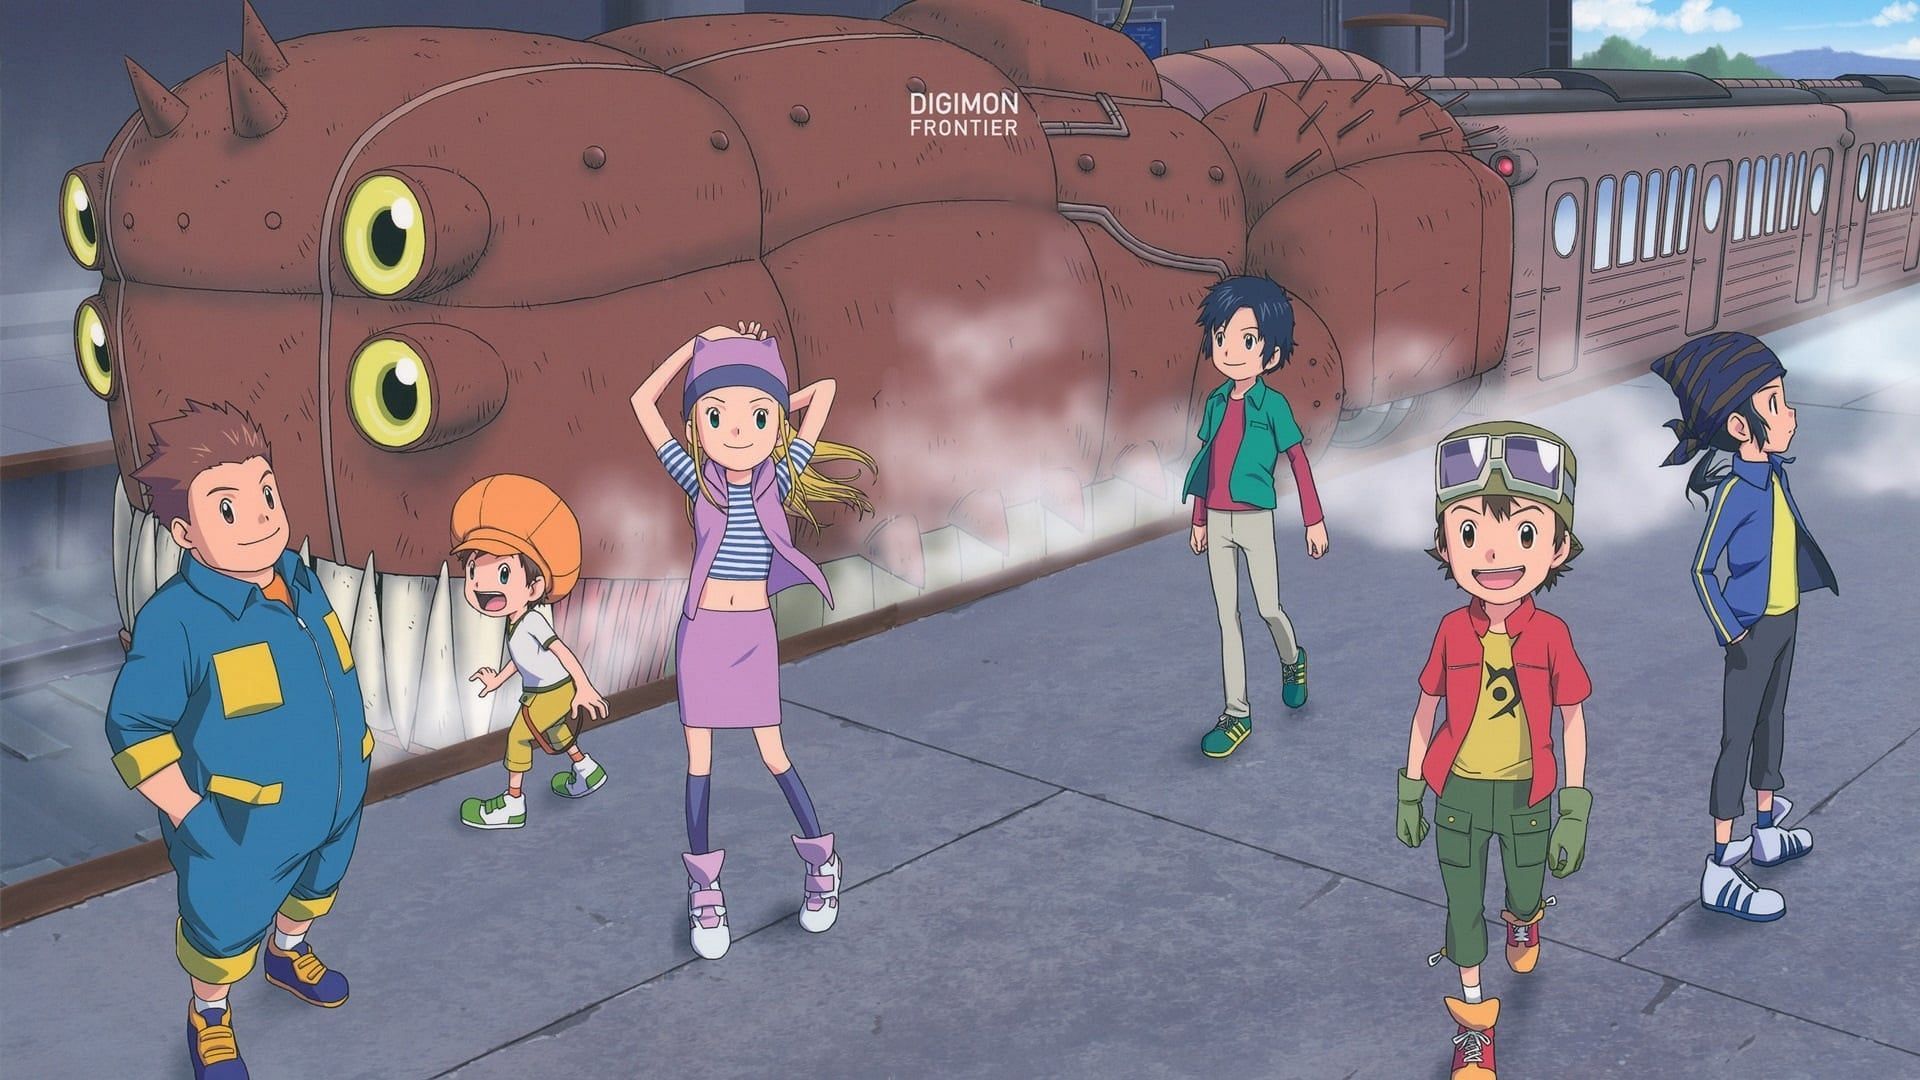 The digidestined from Digimon Frontier (Image via Toei Animation)